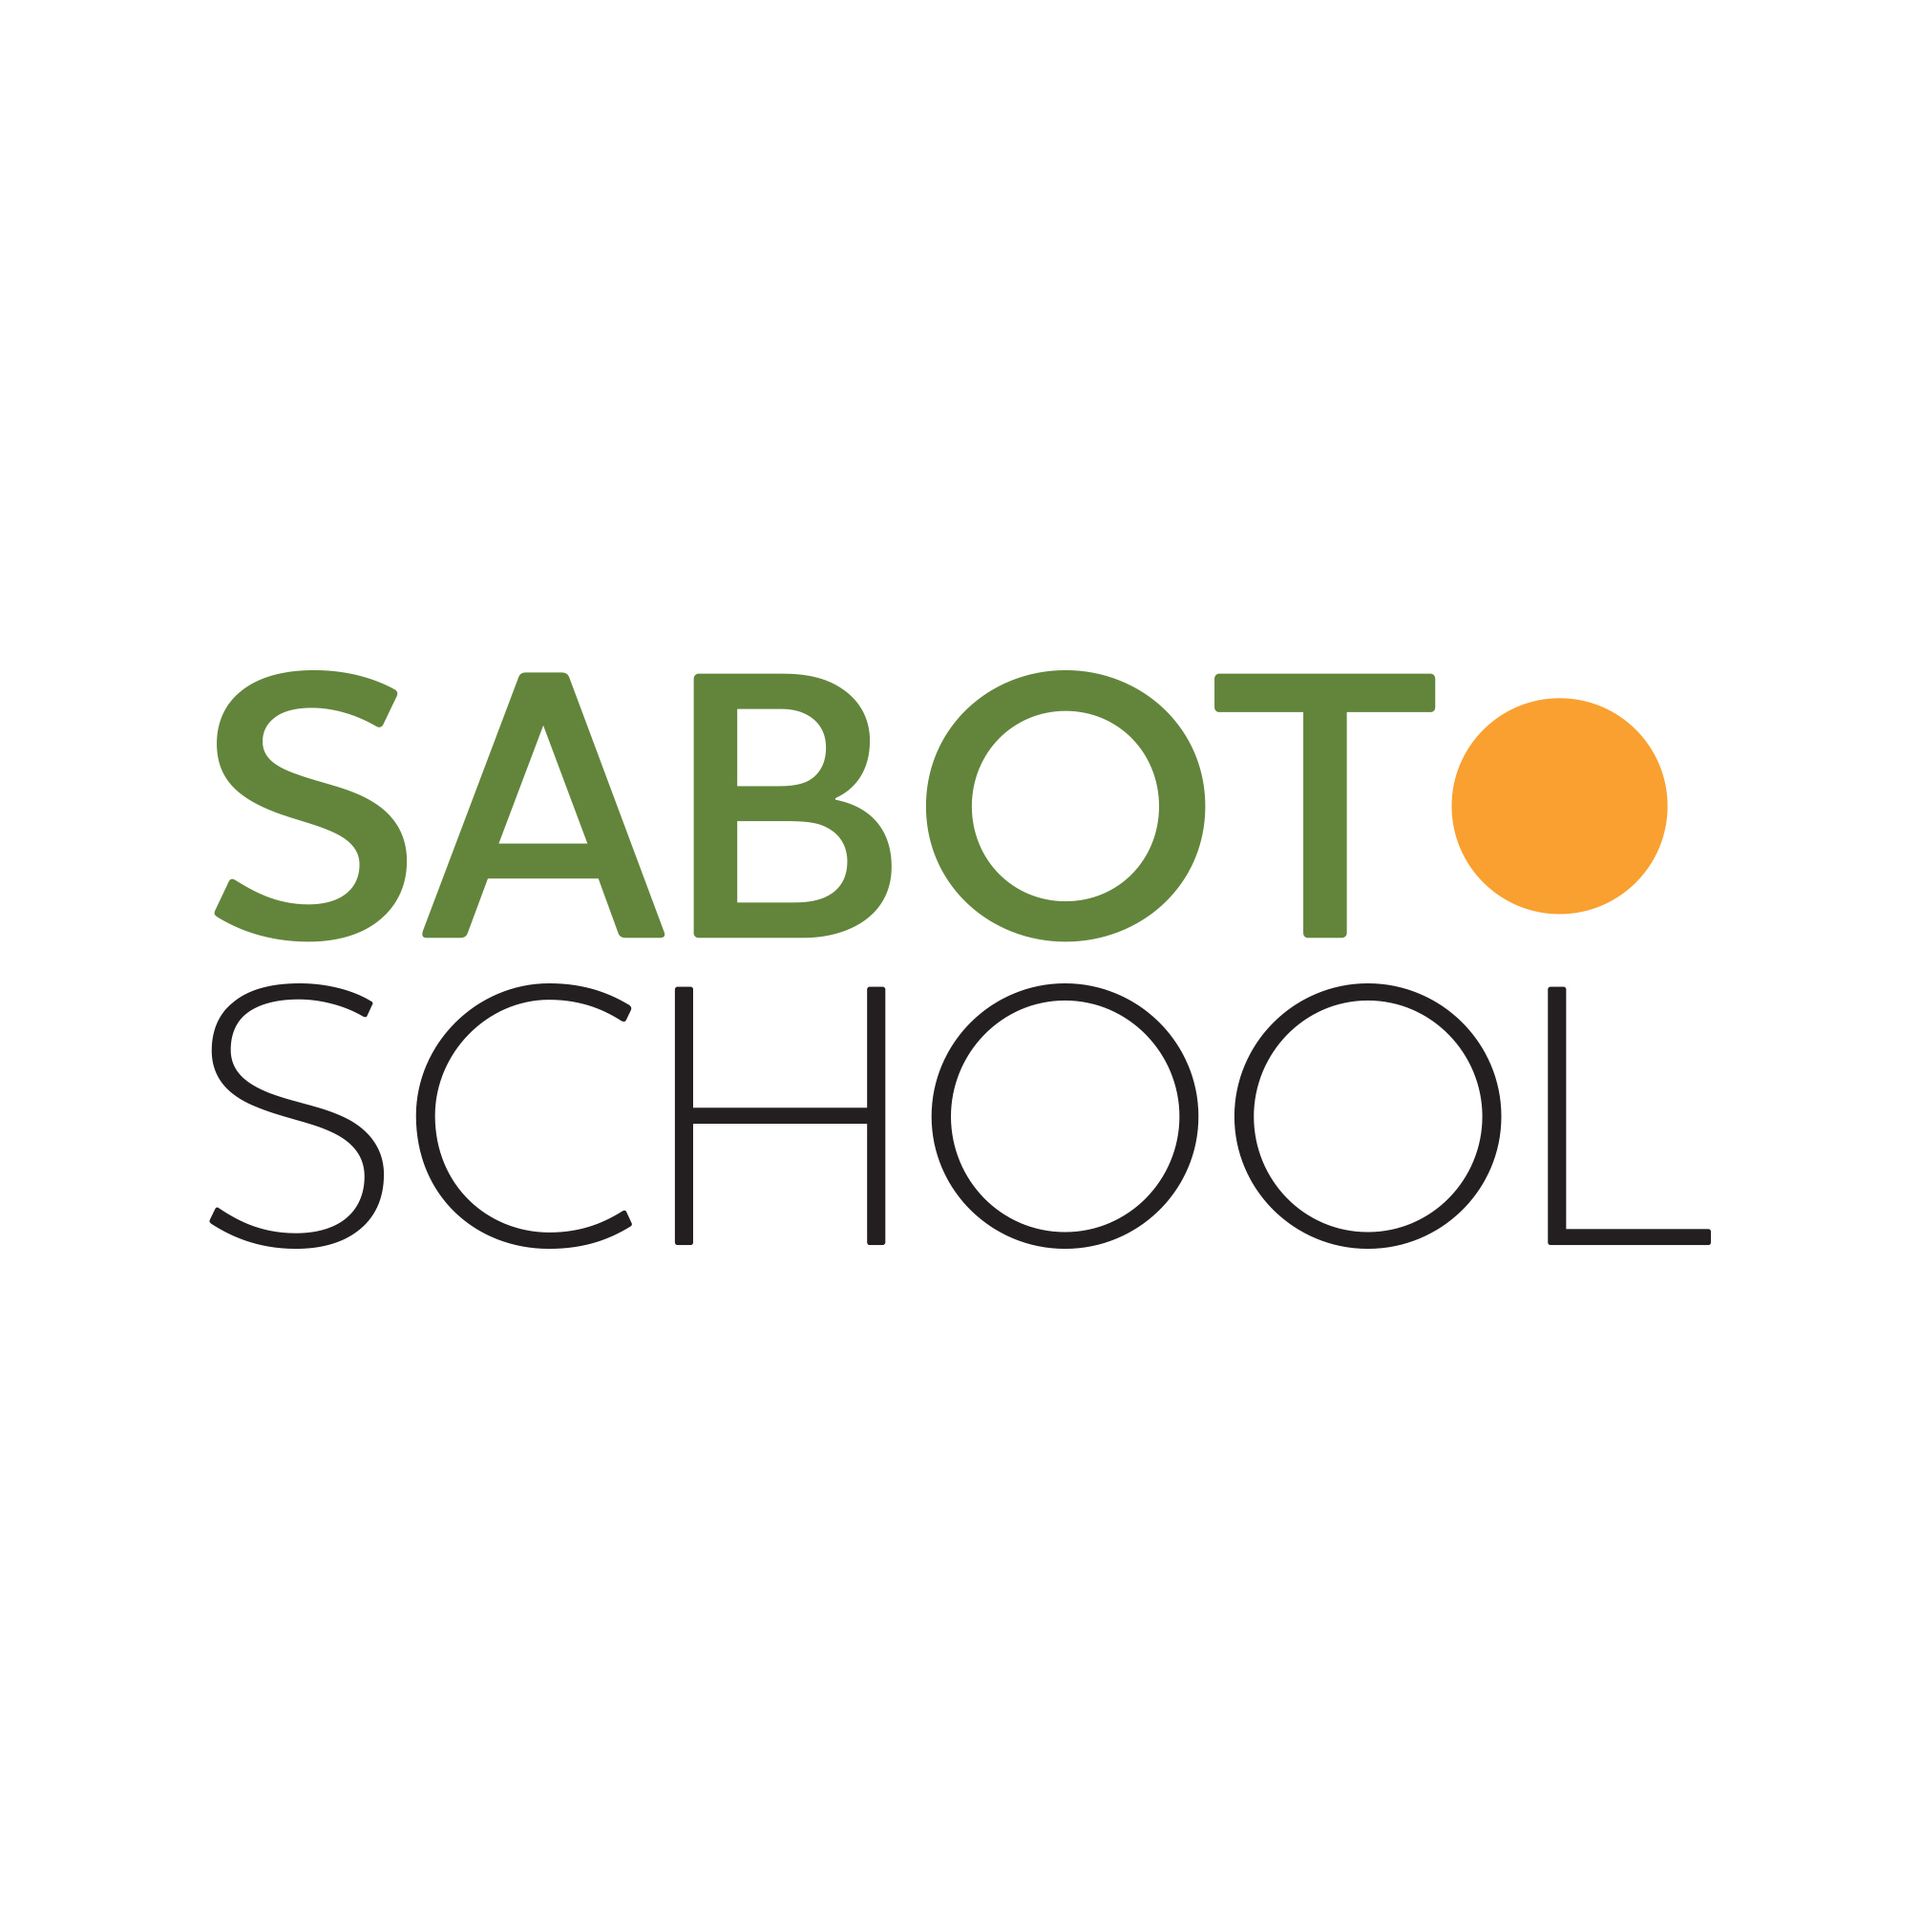 Sabot school logo on we are river city community page